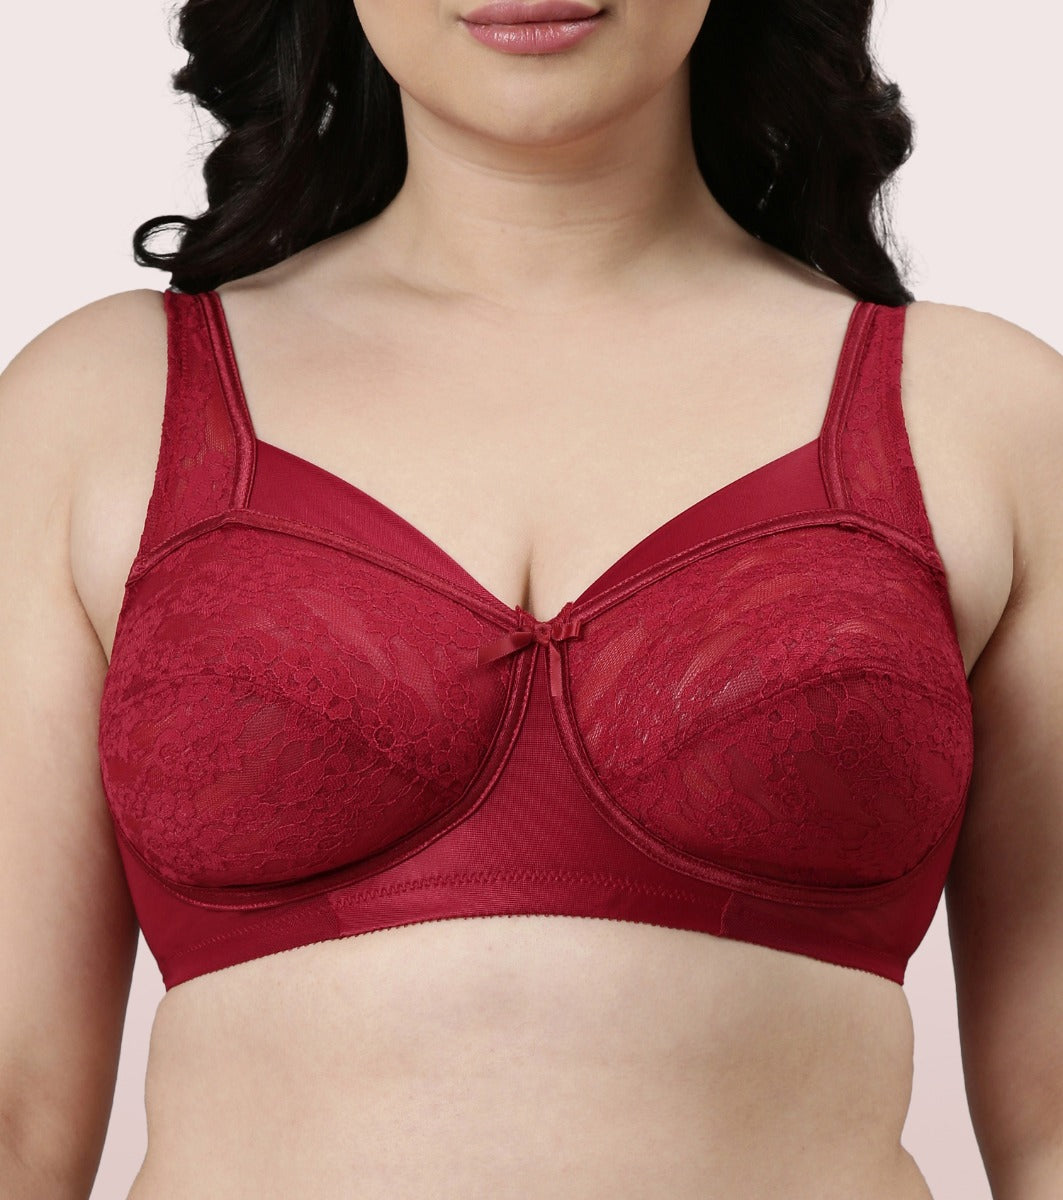 Enamor Full Support Classic Lace Lift Bra For Women - Non-Padded, Non-Wired, High Coverage Bra With Top Panel Support | FB06 | Masai